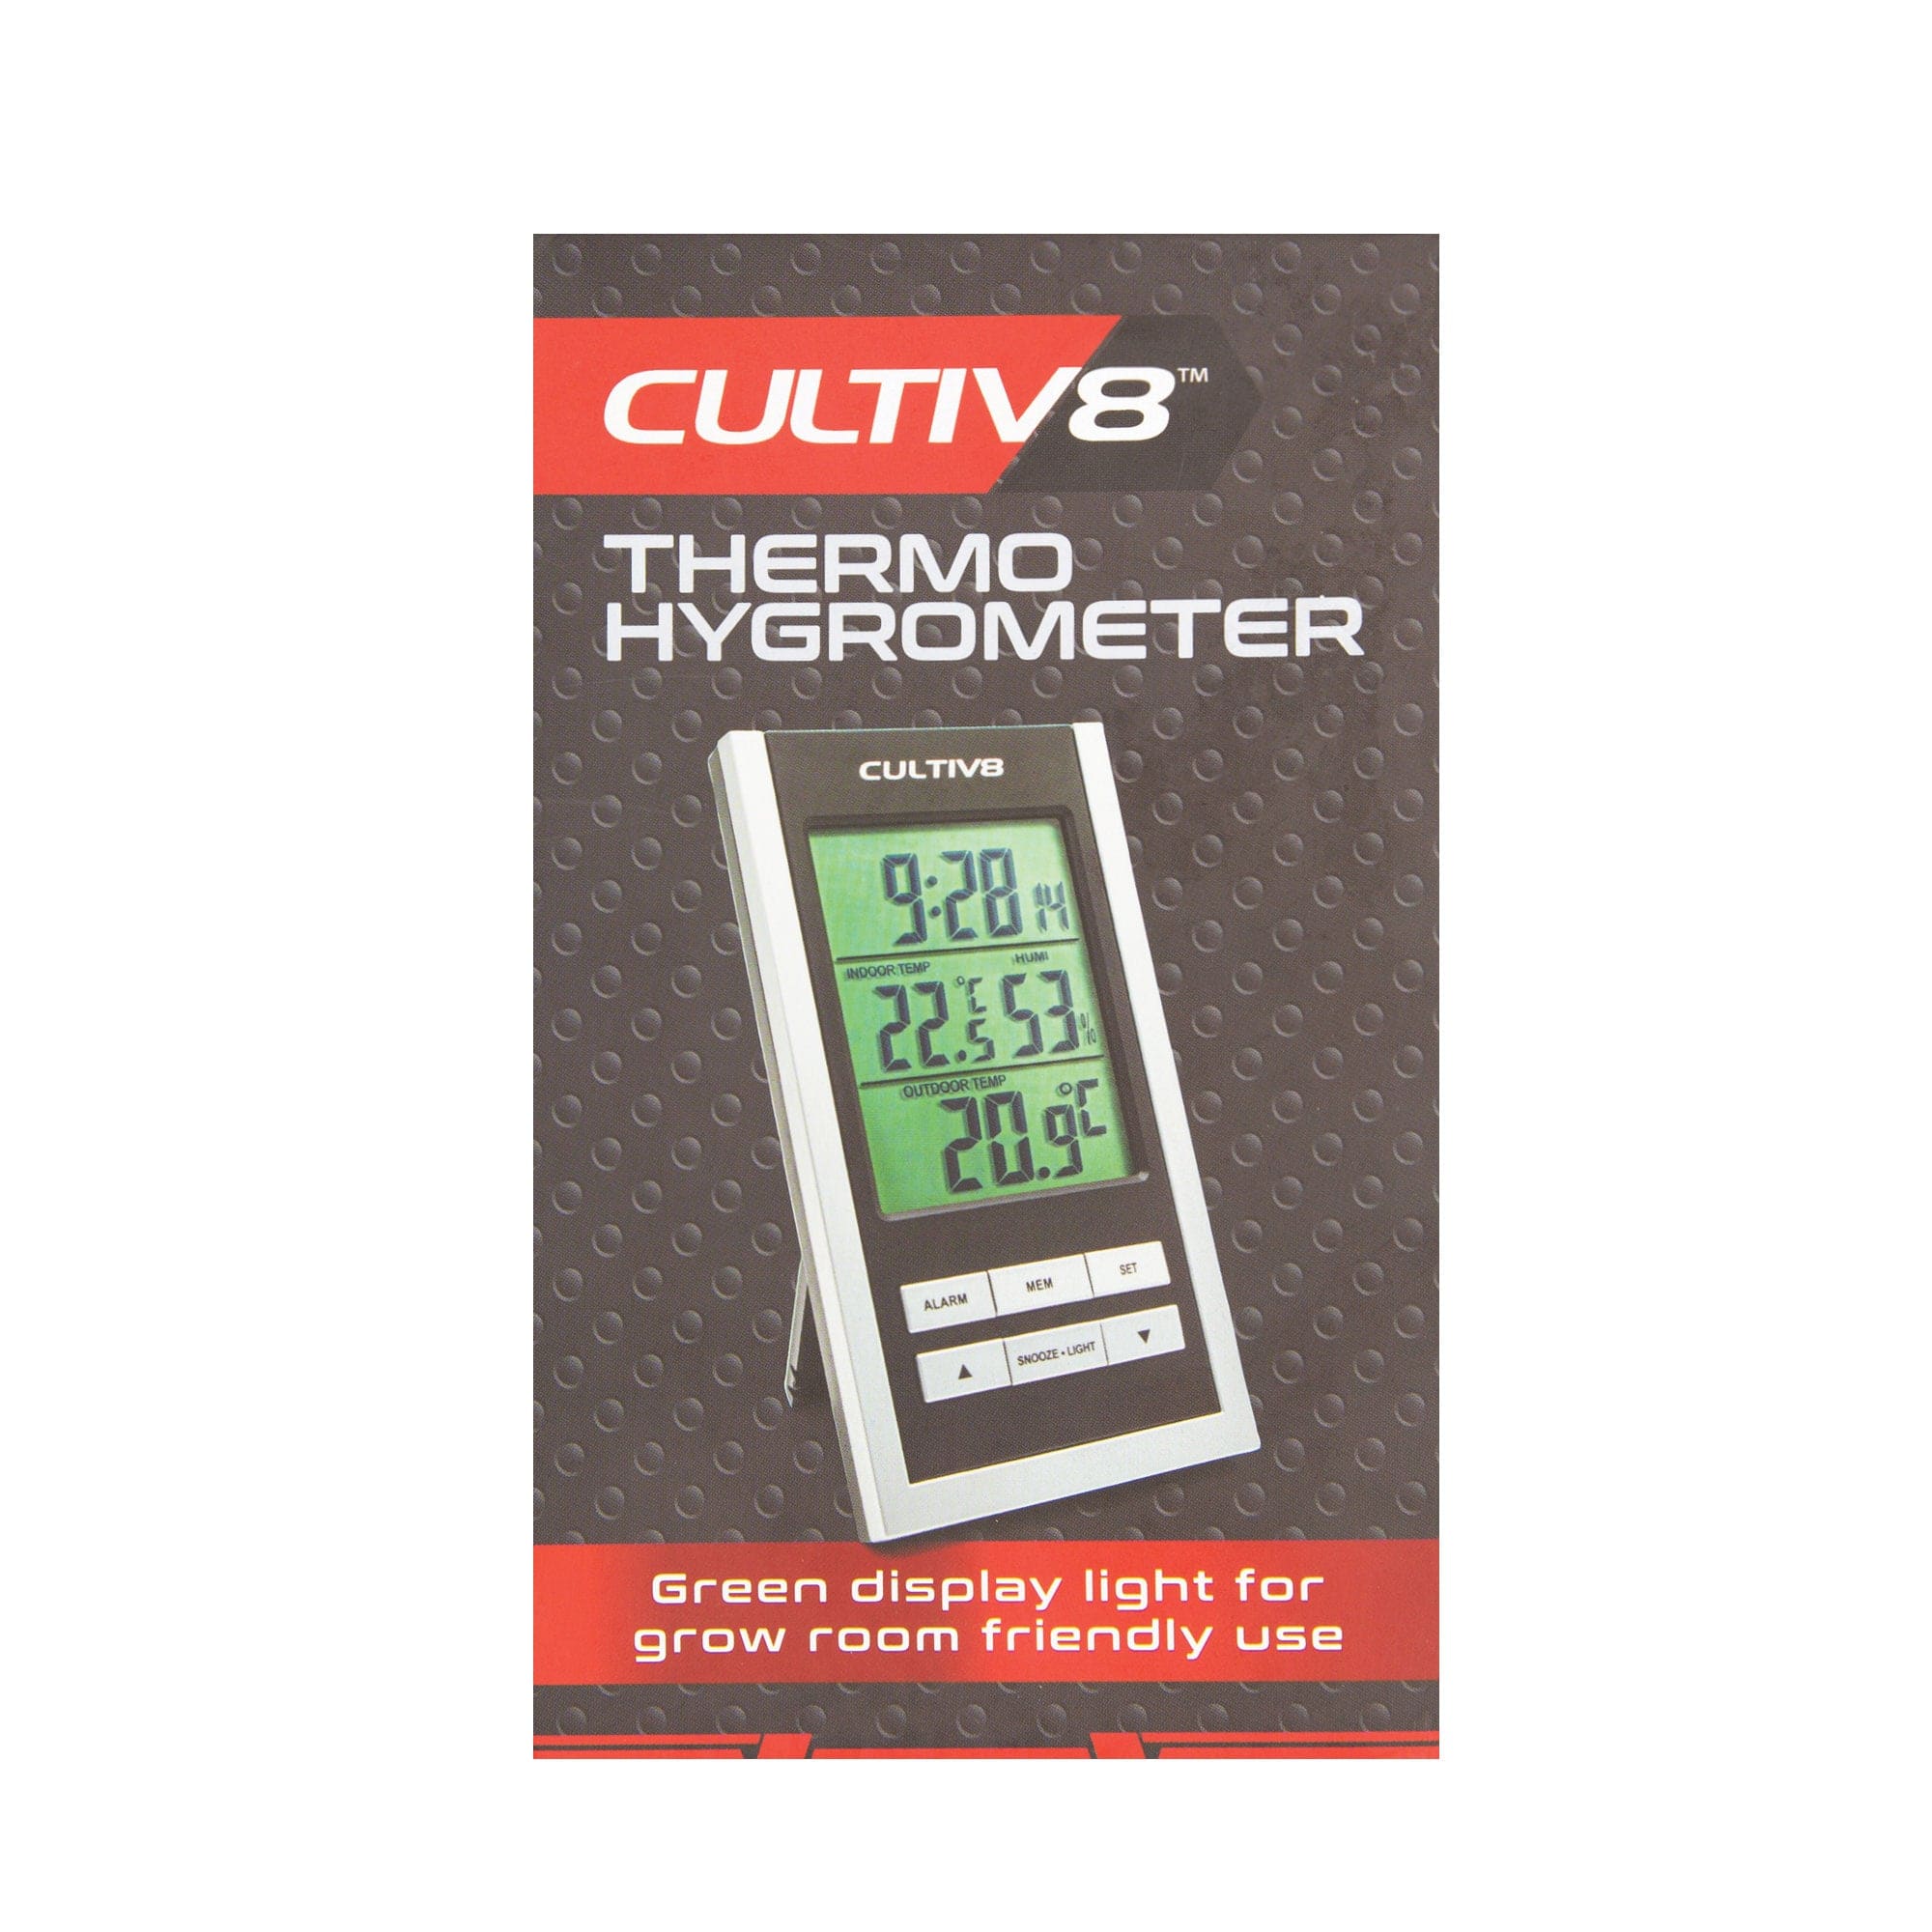 Dr Greenthumbs Cultiv8 Temp + Humidity Reader (Thermometer & Hygrometer)